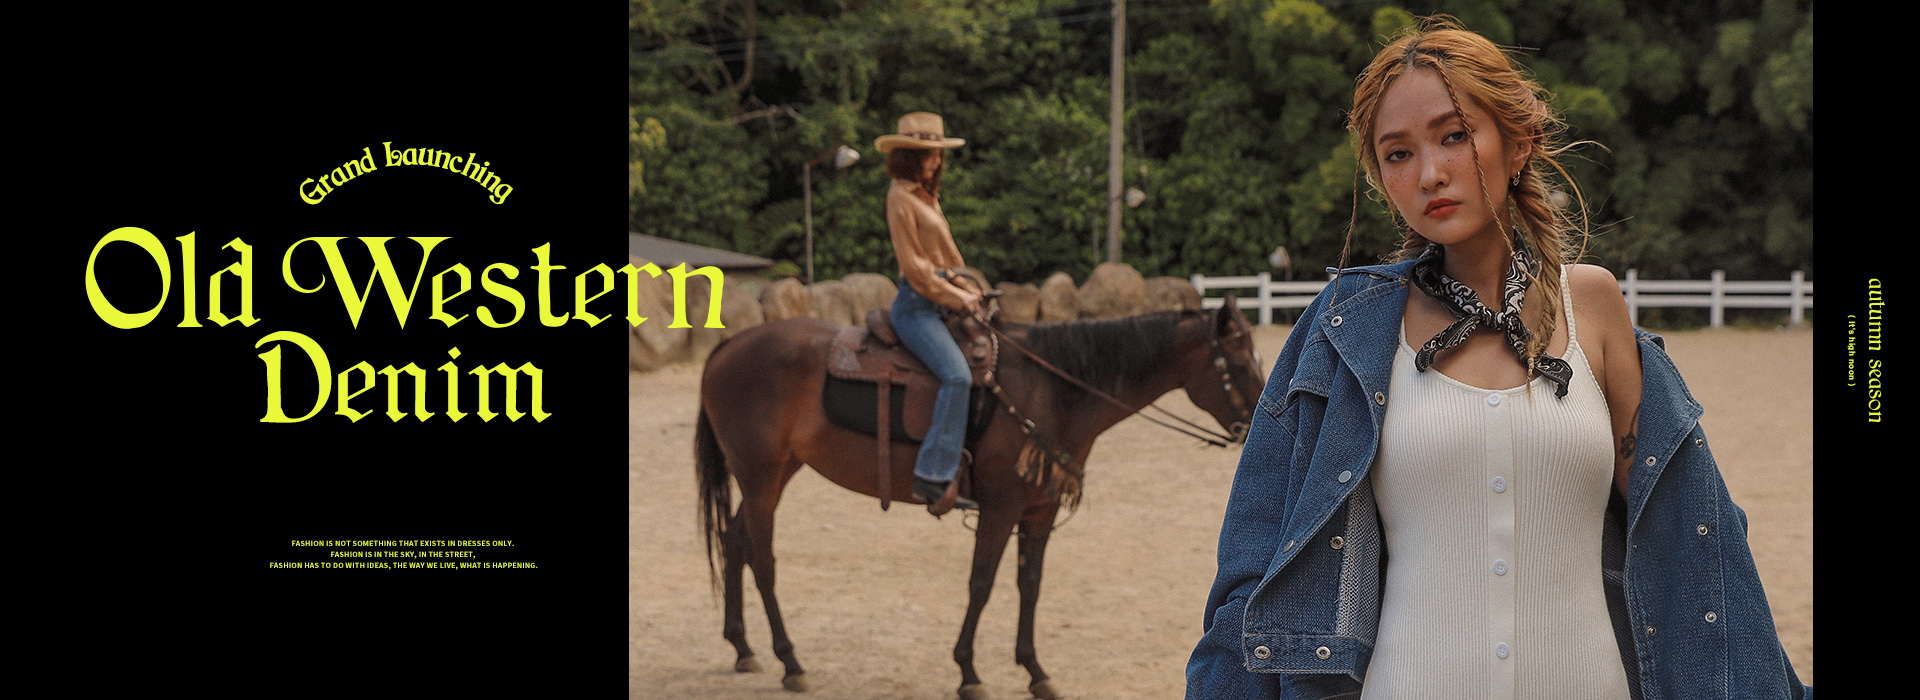 || Old Western Denim || The Old Western Collection is Coming!